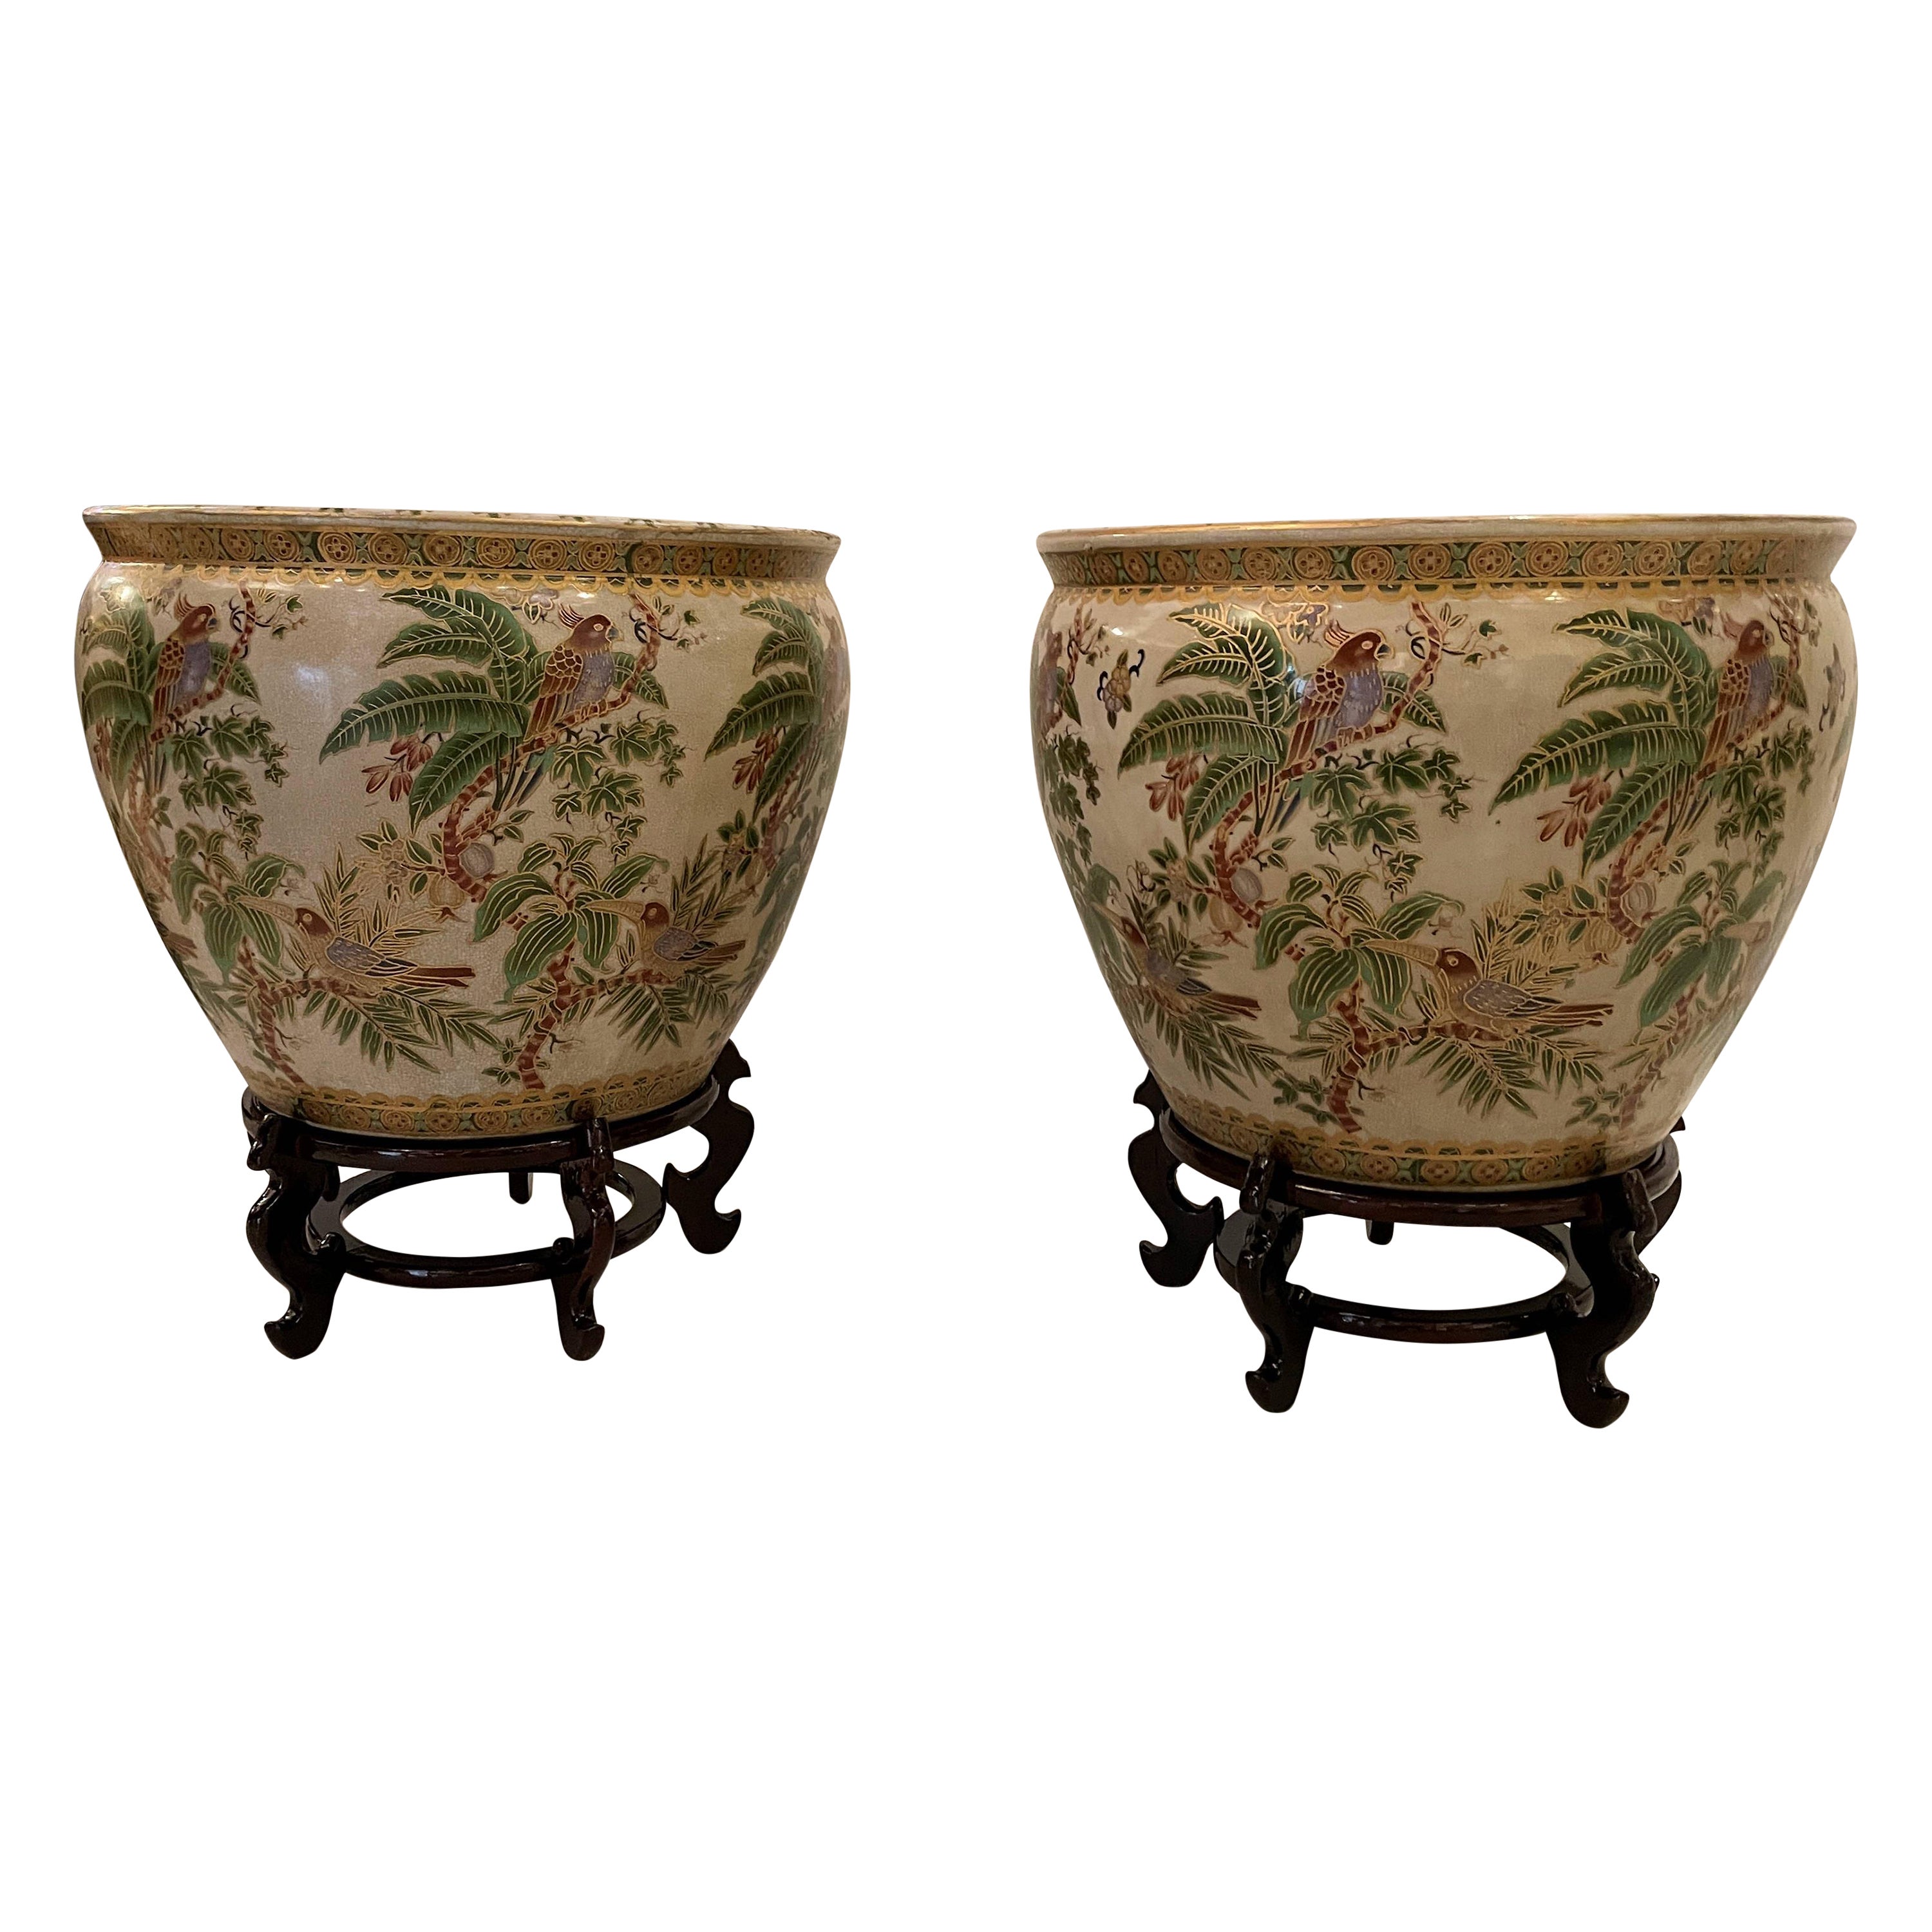 Large Tropical Pair of Porcelain Chinese Fishbowl Planters